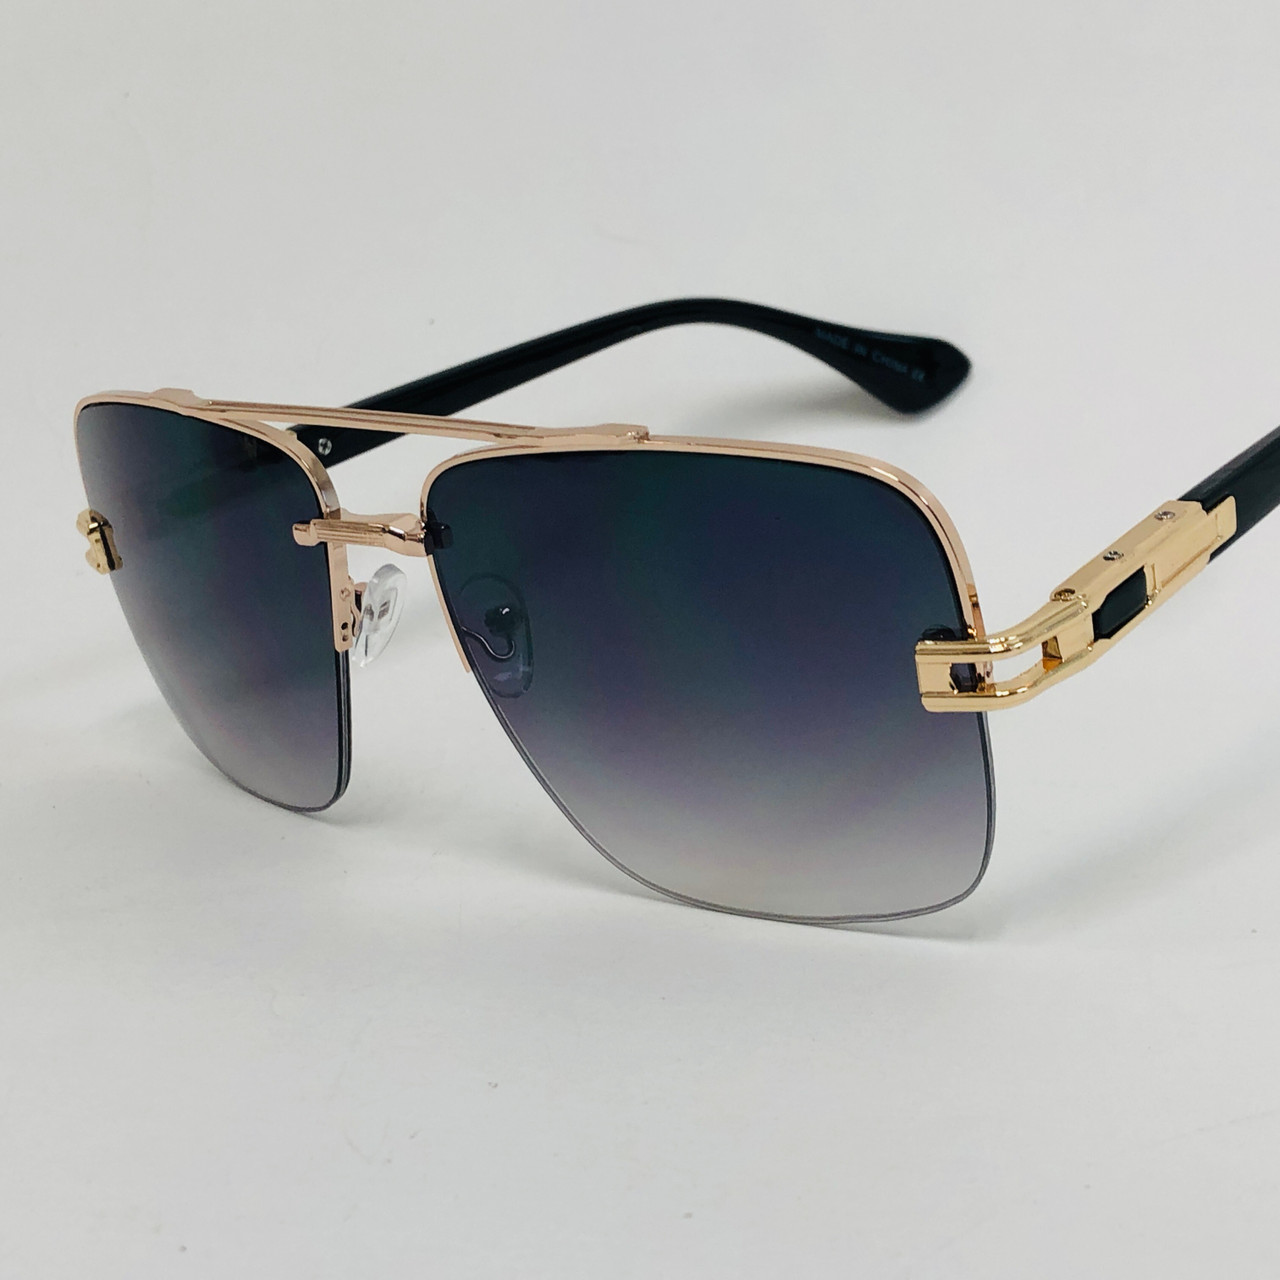 Mens Designer Gold Aviator Sunglasses With Classic Attitude 0259 Metal  Square Frame, Retro Avant Garde Style, UV 400 Protection For Outdoor  Activities From Hexiang3, $17.78